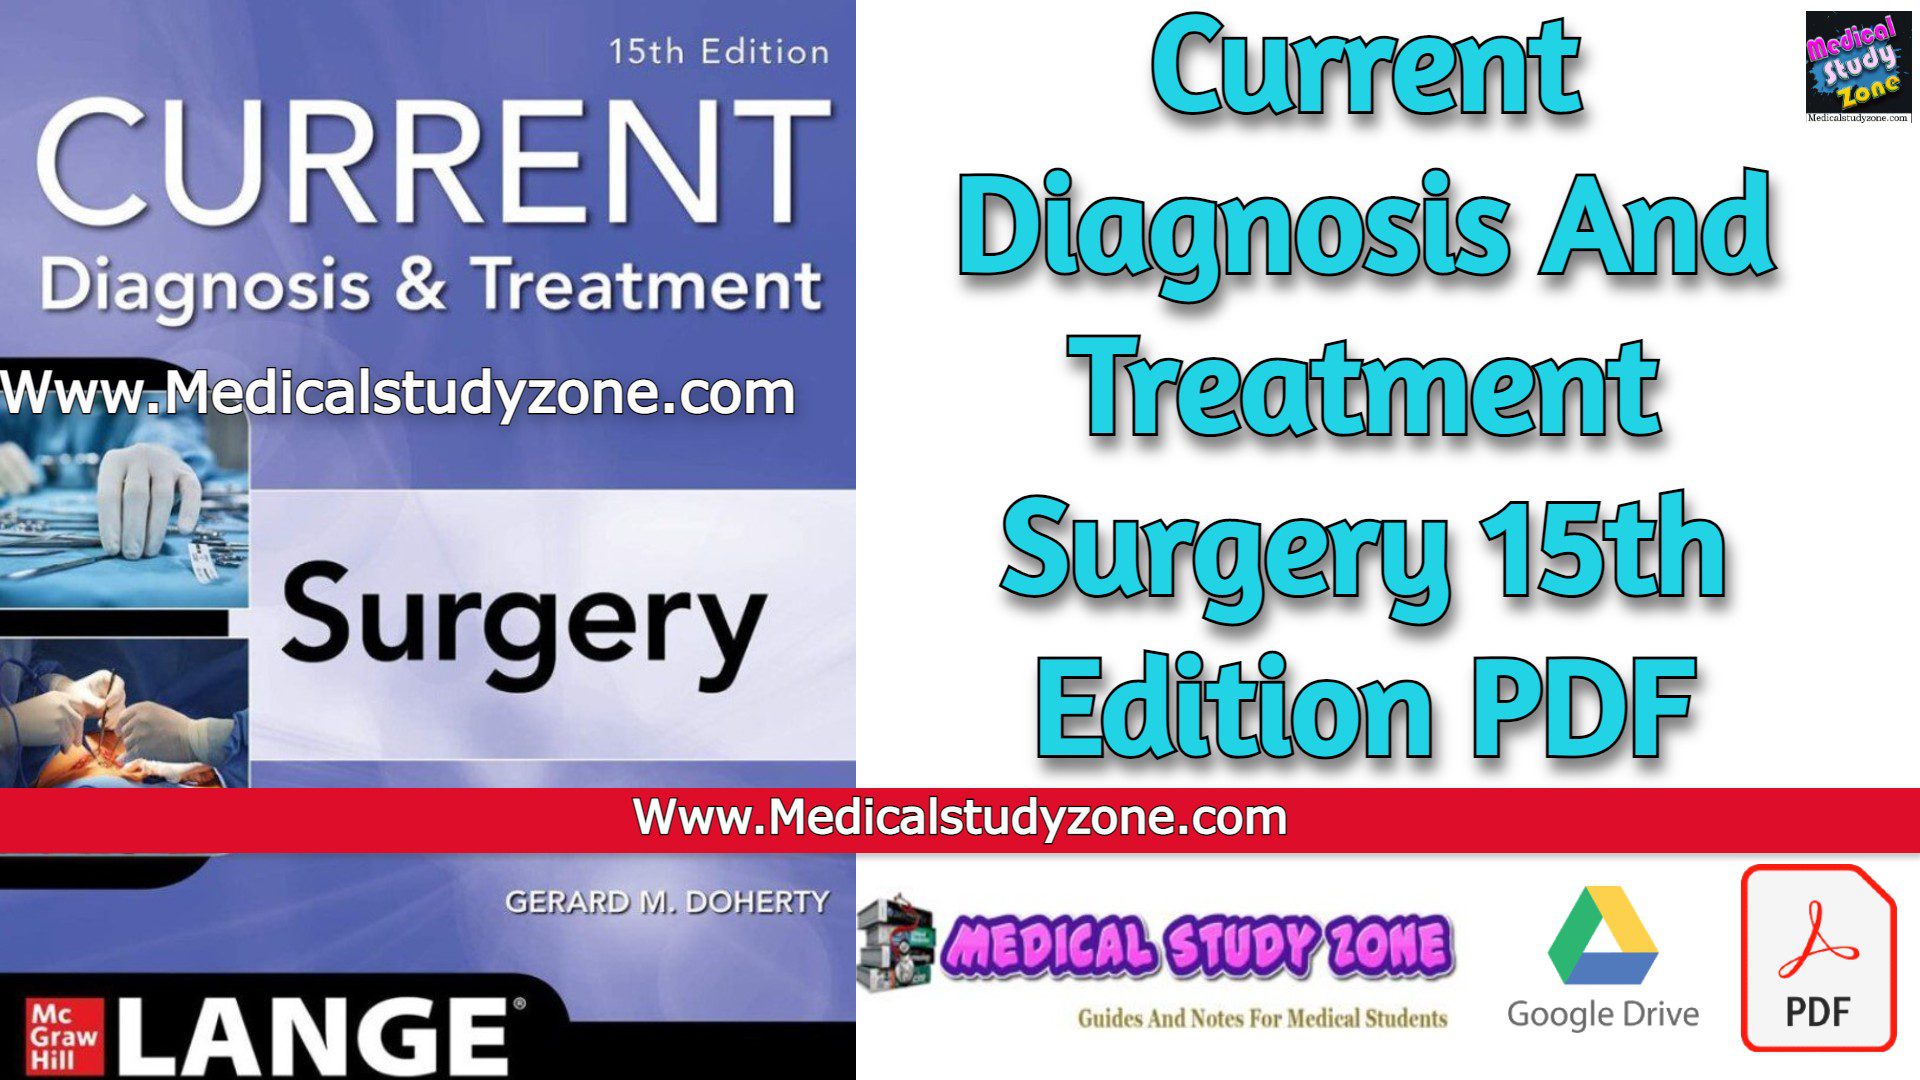 Current Diagnosis And Treatment Surgery 15th Edition PDF Free Download